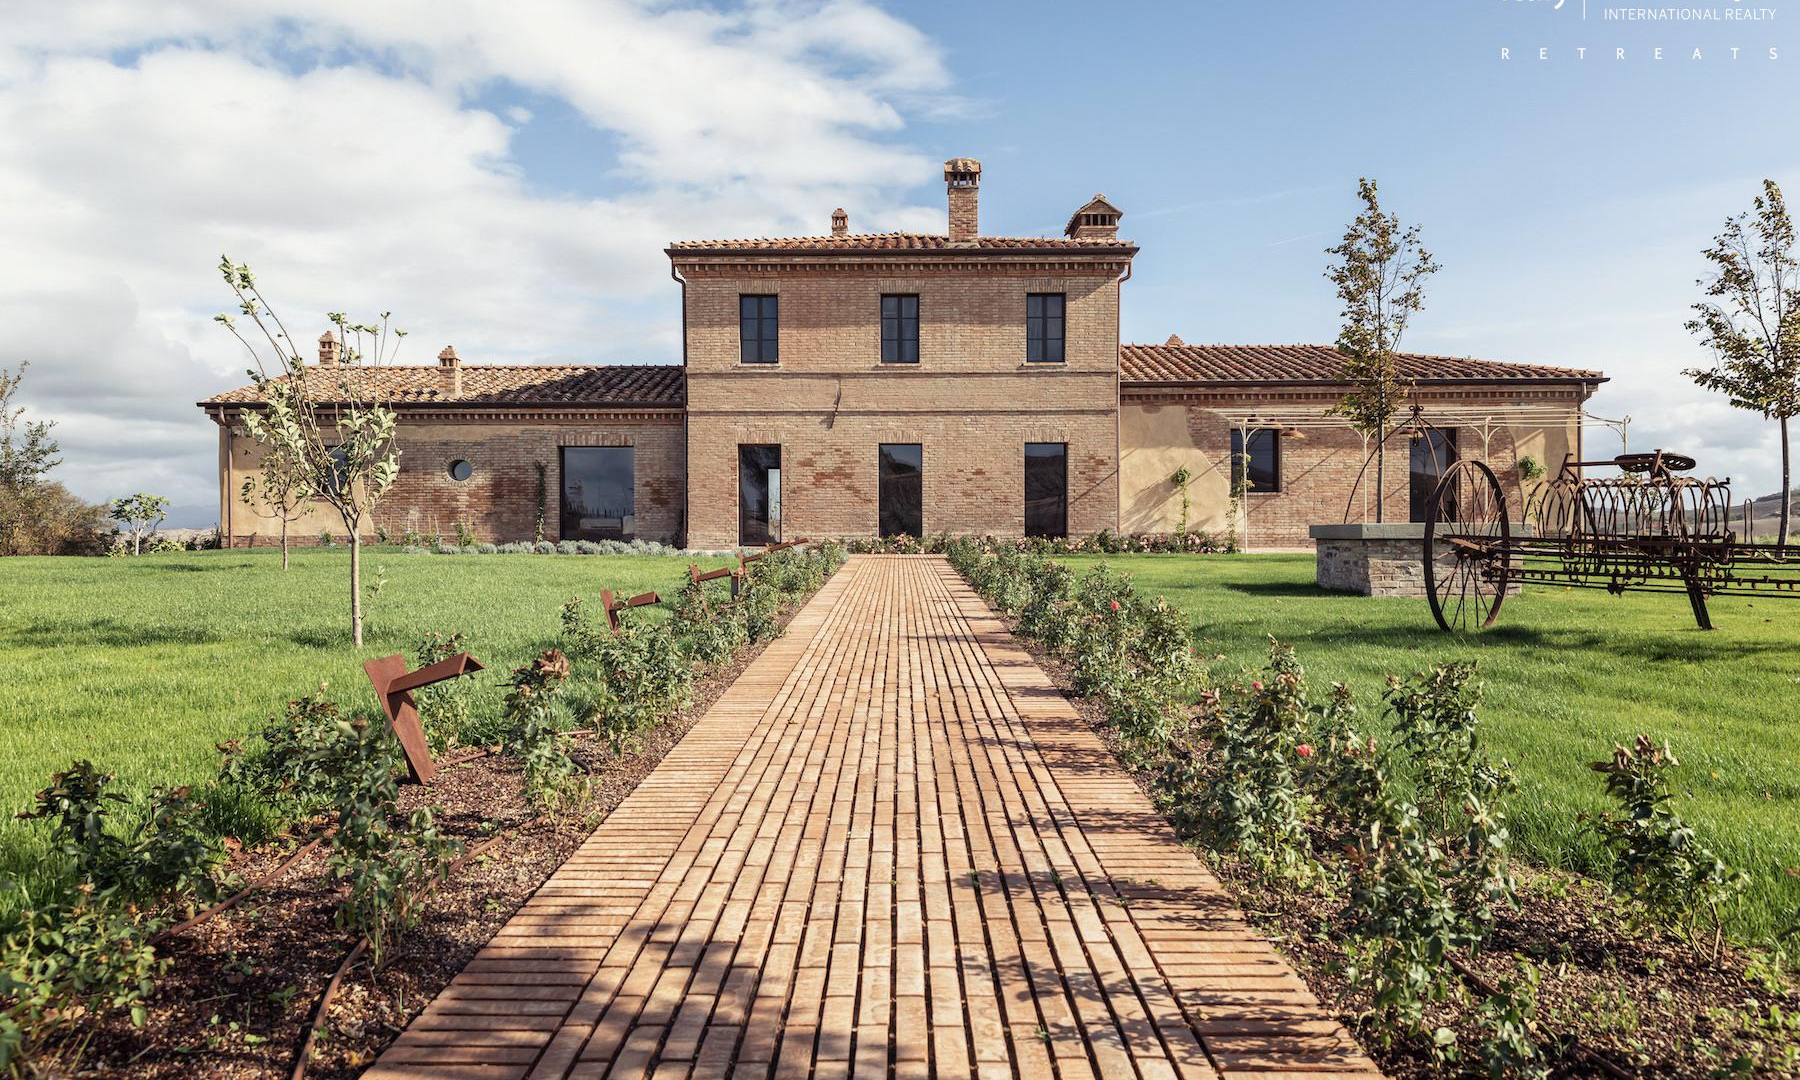 For rent: Country house in the heart of Tuscany, Italy - Siena